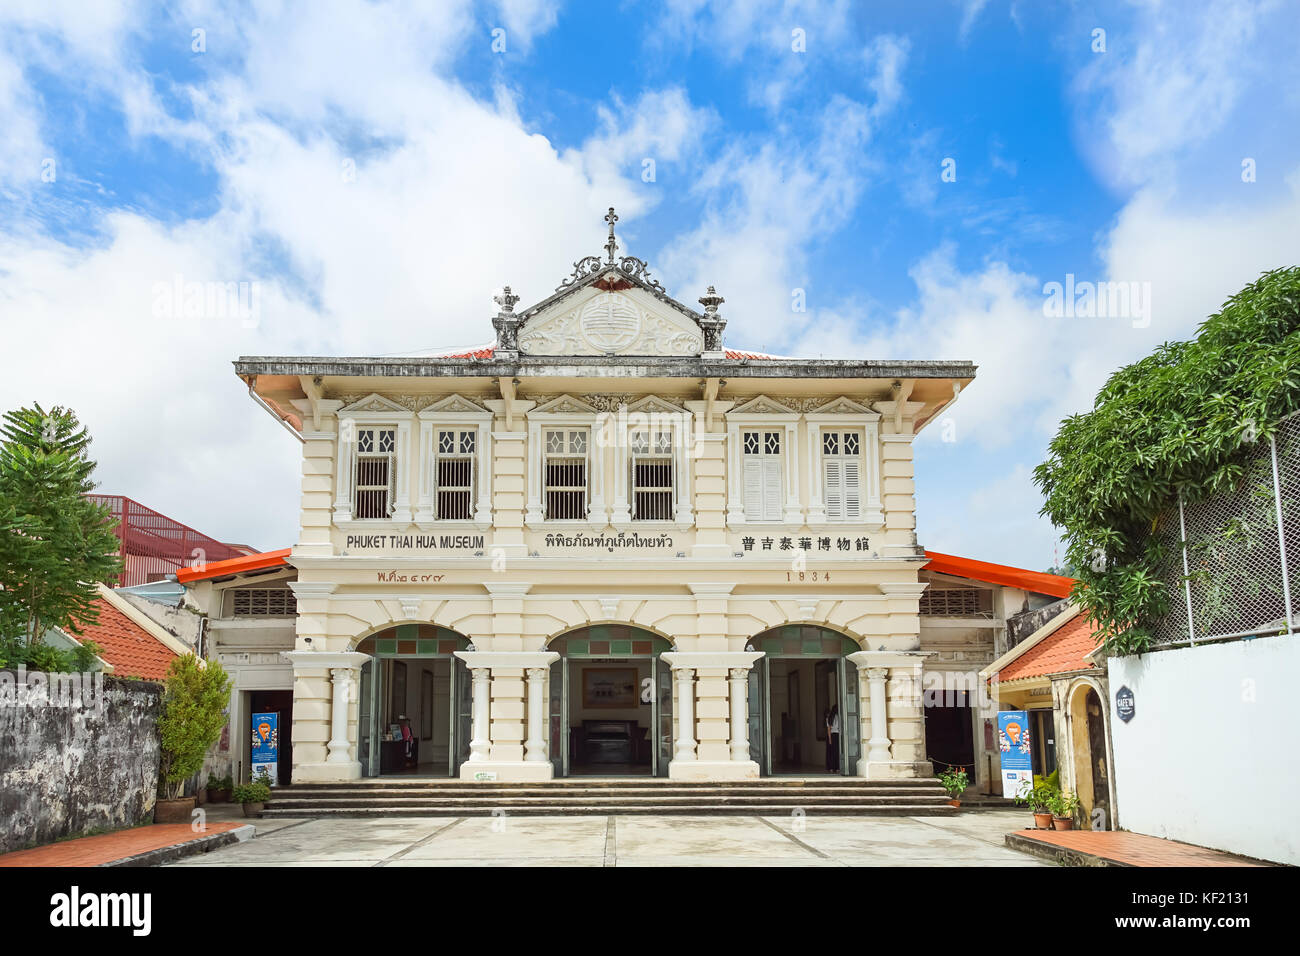 PHUKET, THAILAND - September 14, 2017: Front view of the Phuket Thai Hua Museum in Phuket, Thailand. Stock Photo